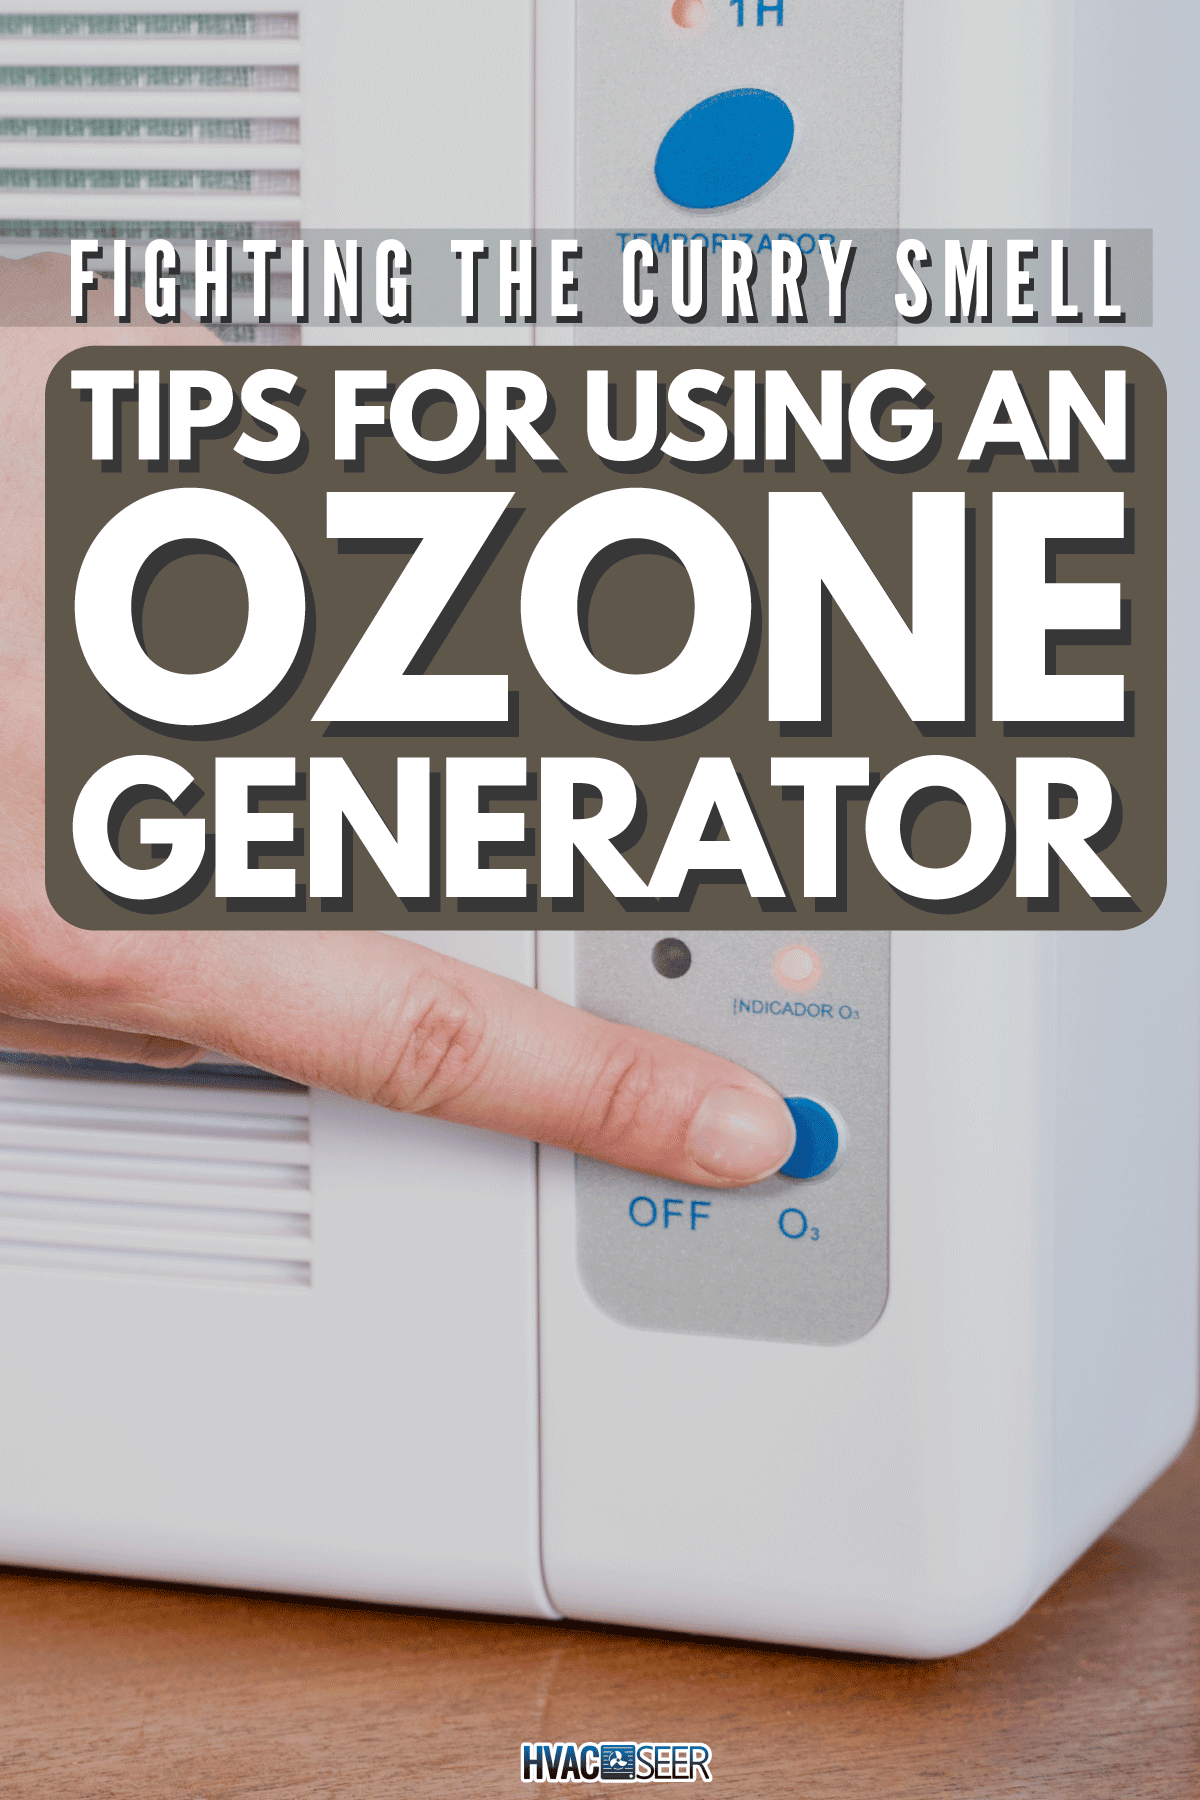 Ozone generators placed on the table in office room to cleaning and disinfection during corona-virus epidemic, Ozone Generator For Curry Smell - How To Remove The Odor